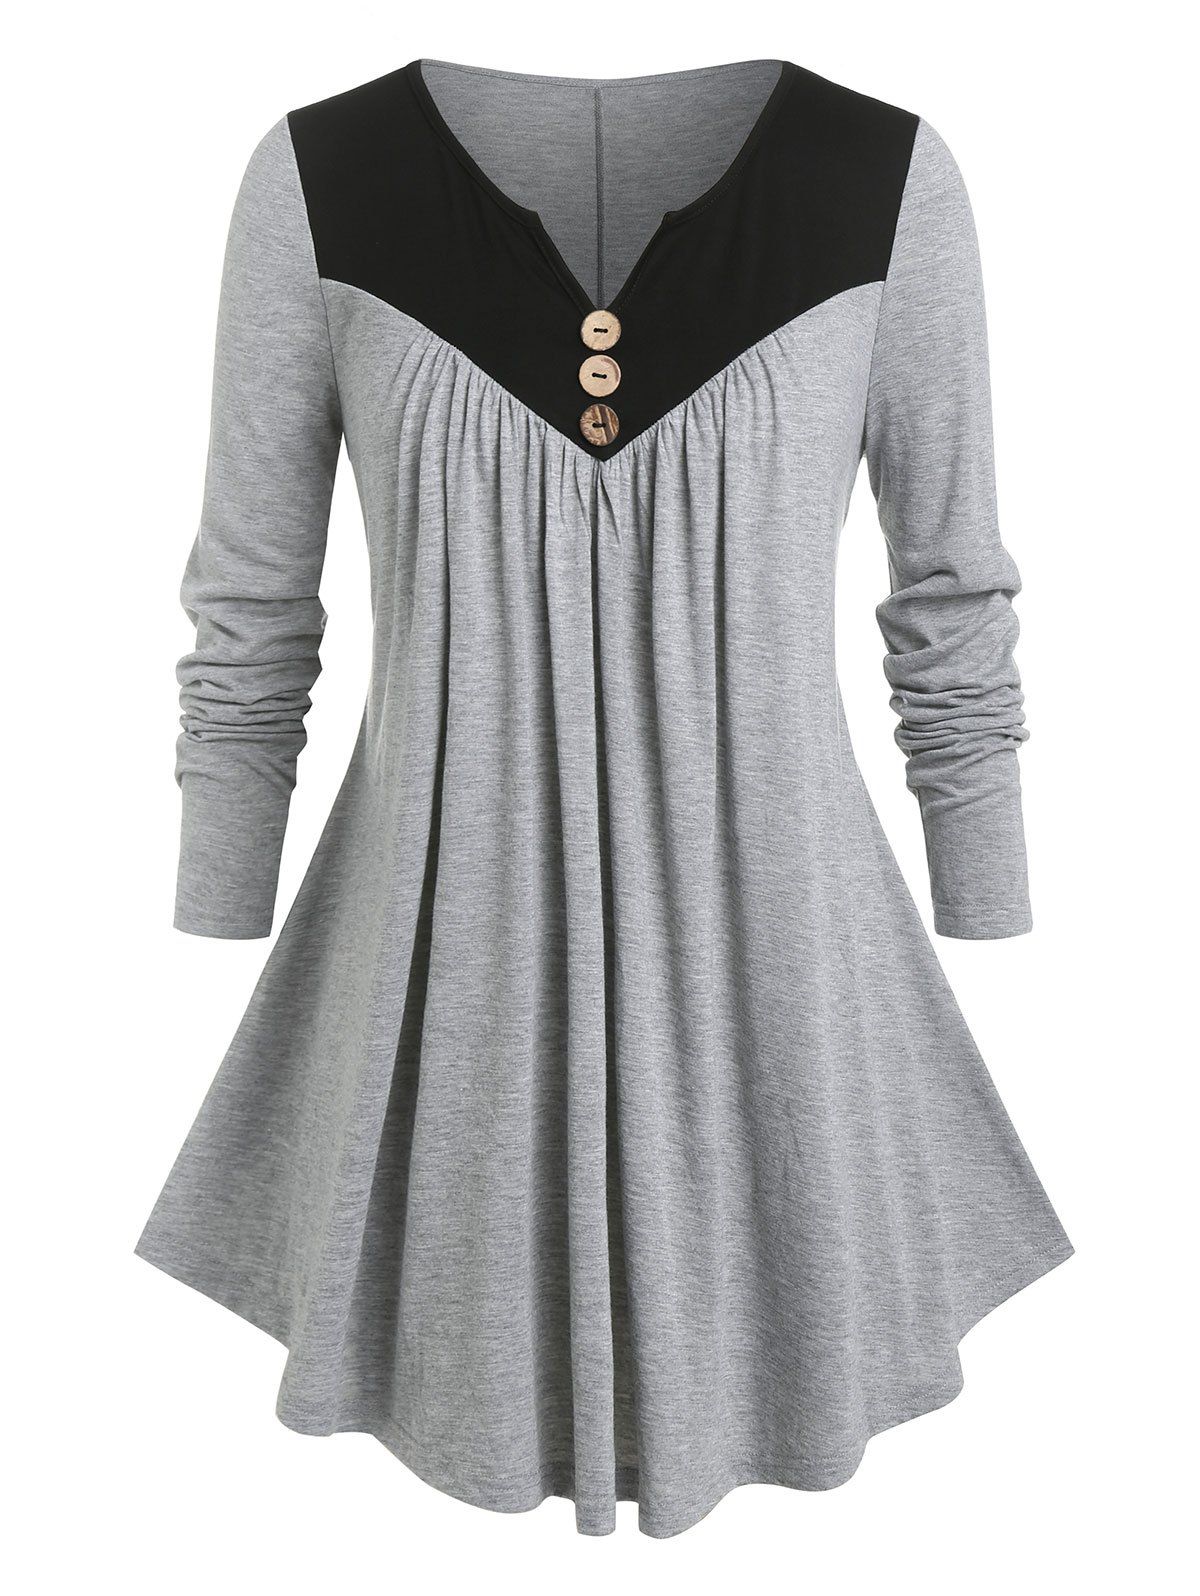 Plus Size Colorblock Buttons Pleated T Shirt - LIGHT GRAY 2X